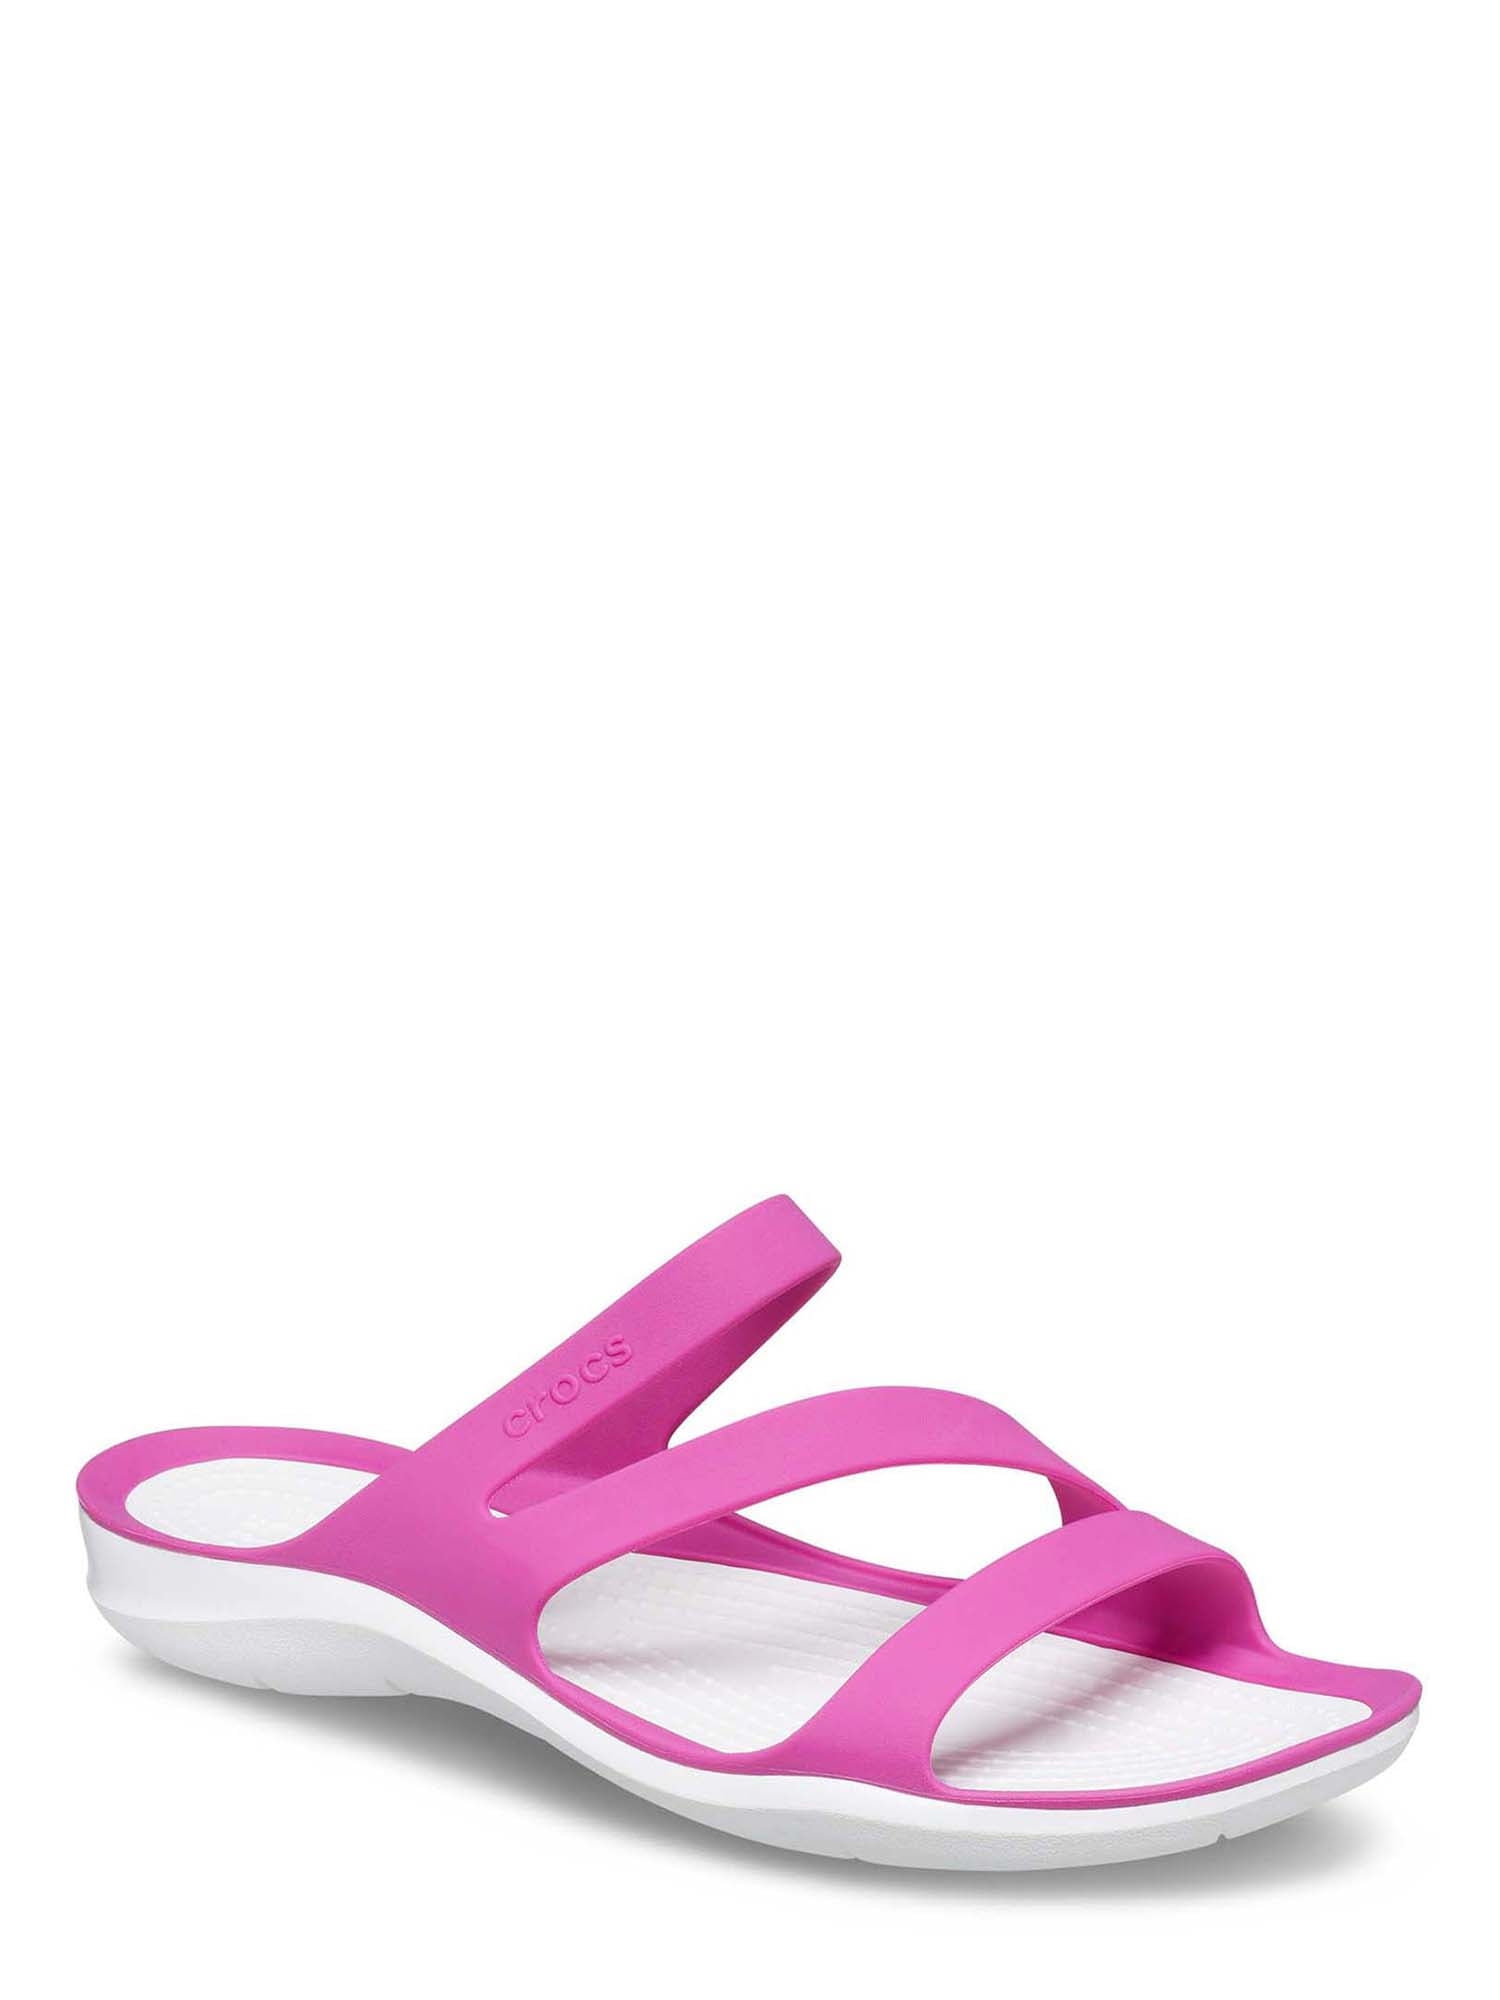 Crocs Women's LiteRide Stretch Sandals Water Shoes, Neo Mint/Almost White,  11 M US | Walmart Canada